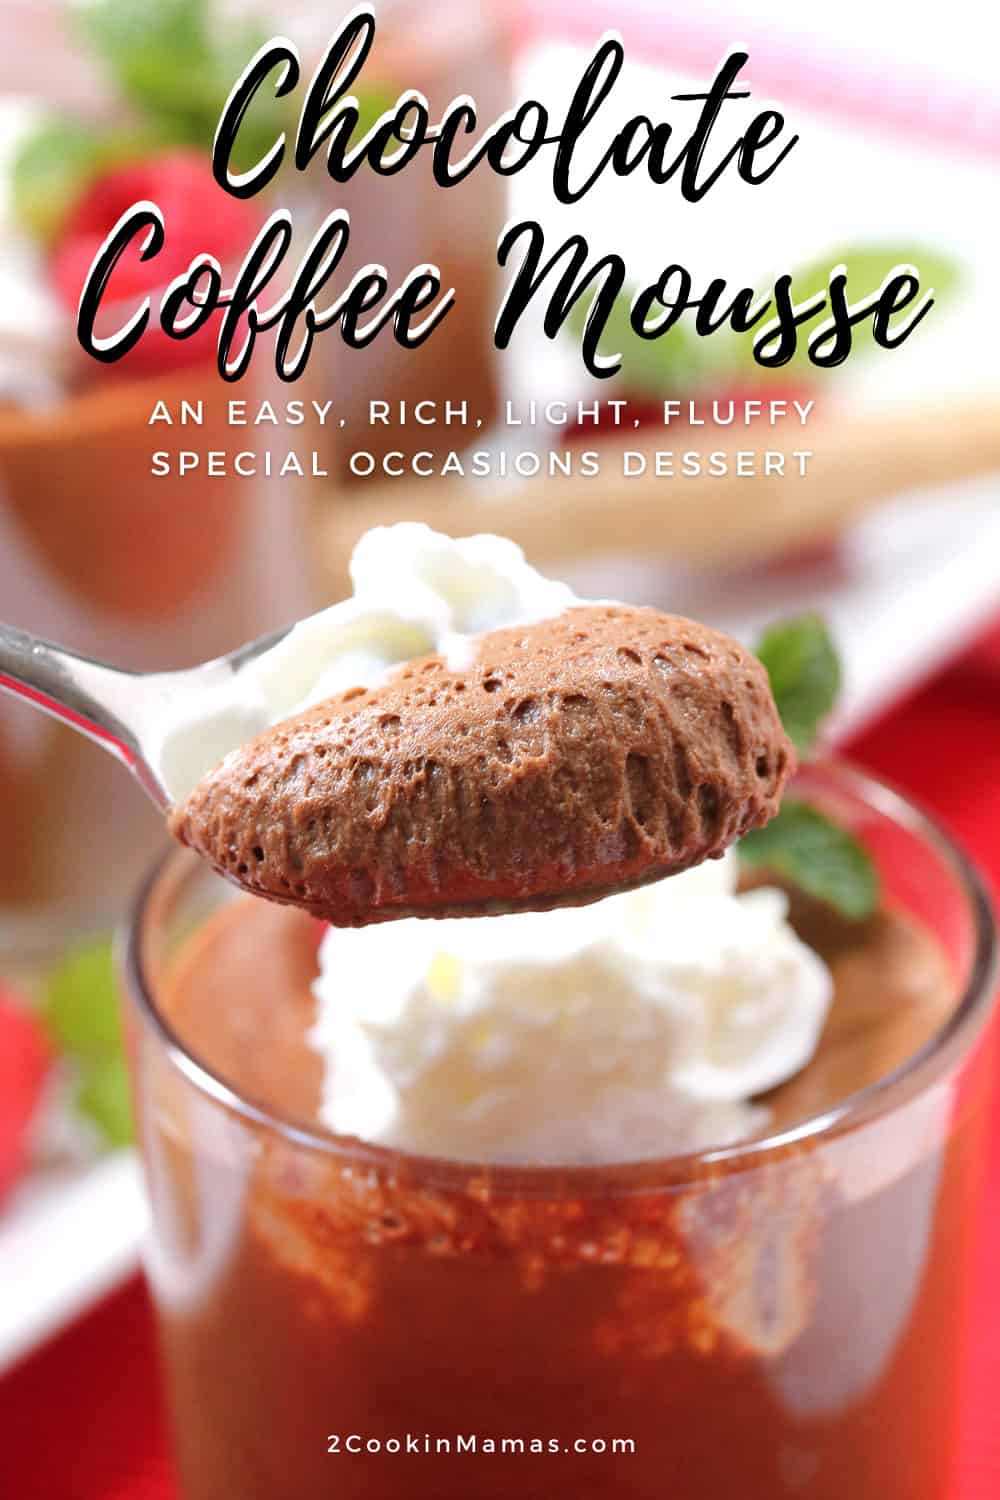 Chocolate Coffee Mousse